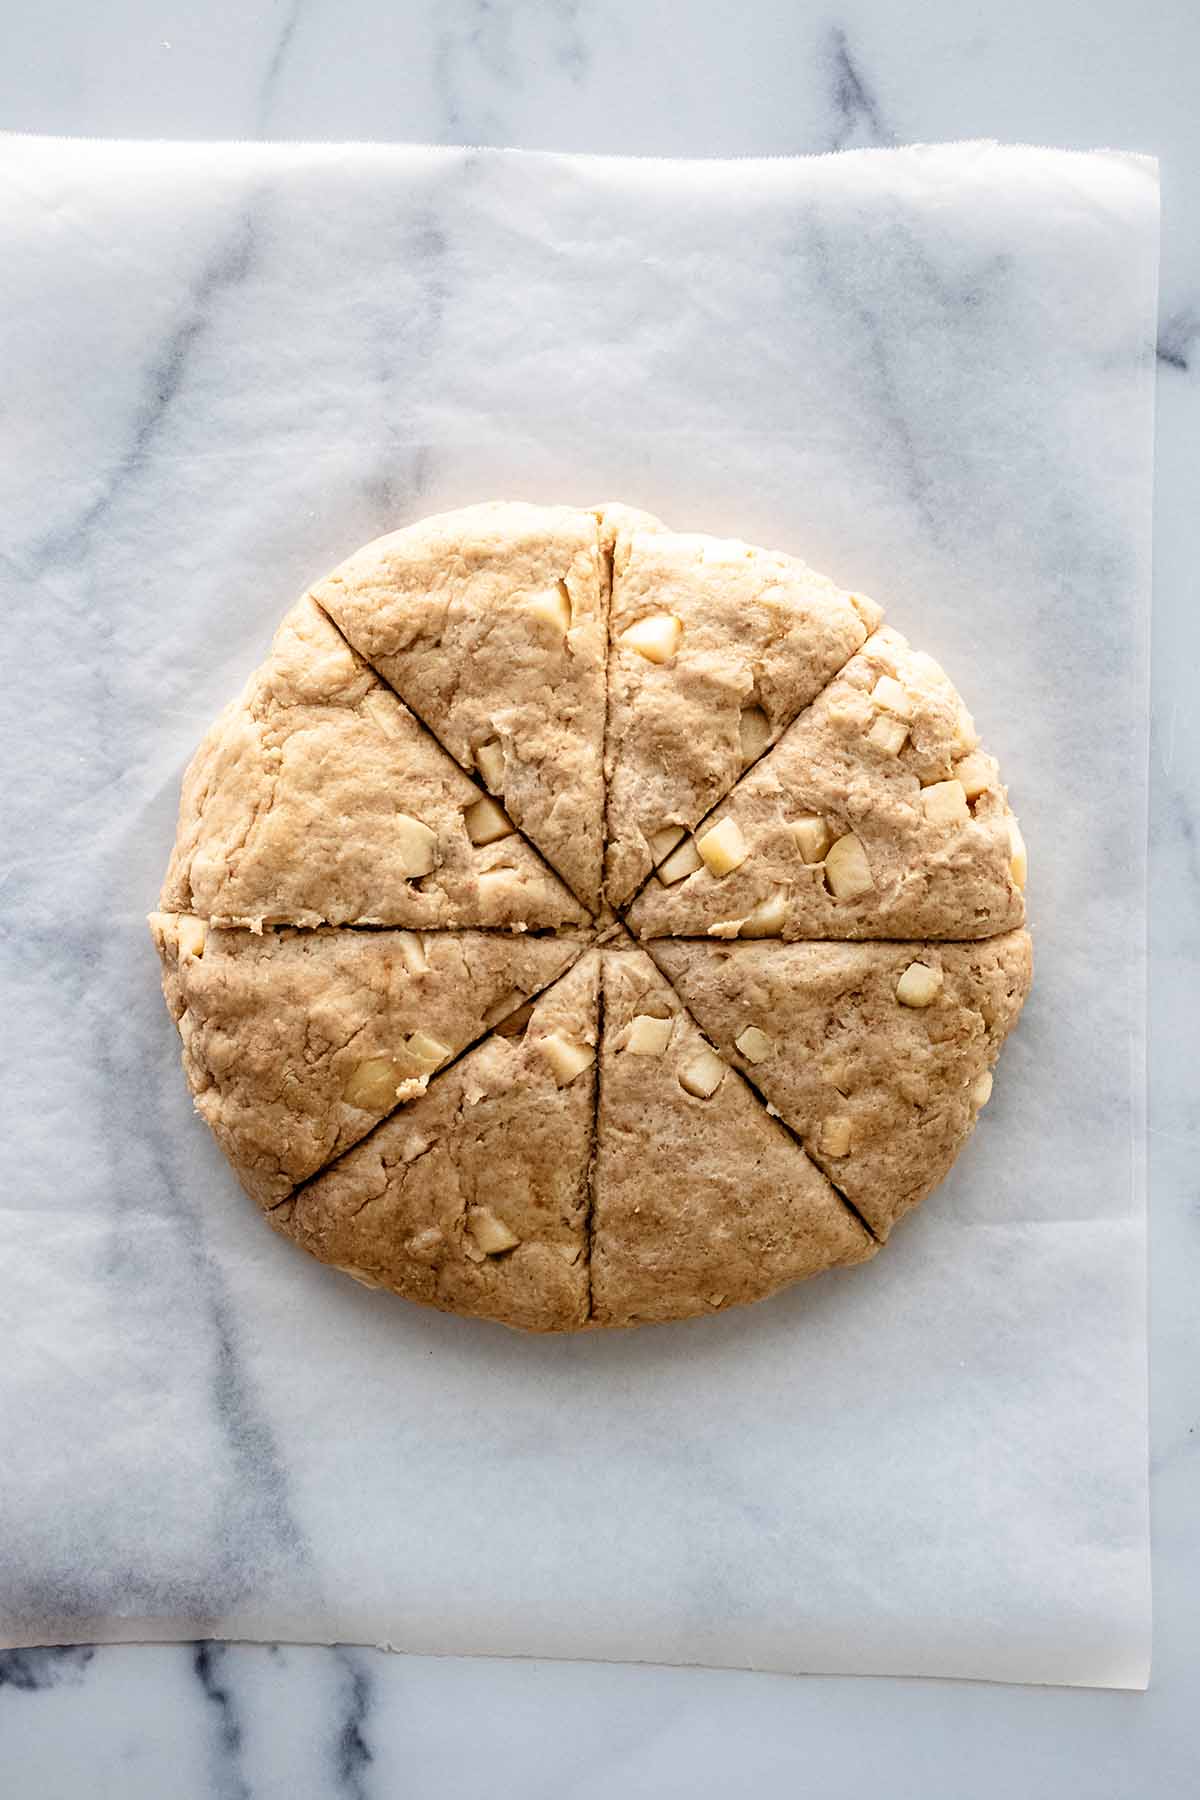 Top view of a disc of scone dough cut into 8 triangles